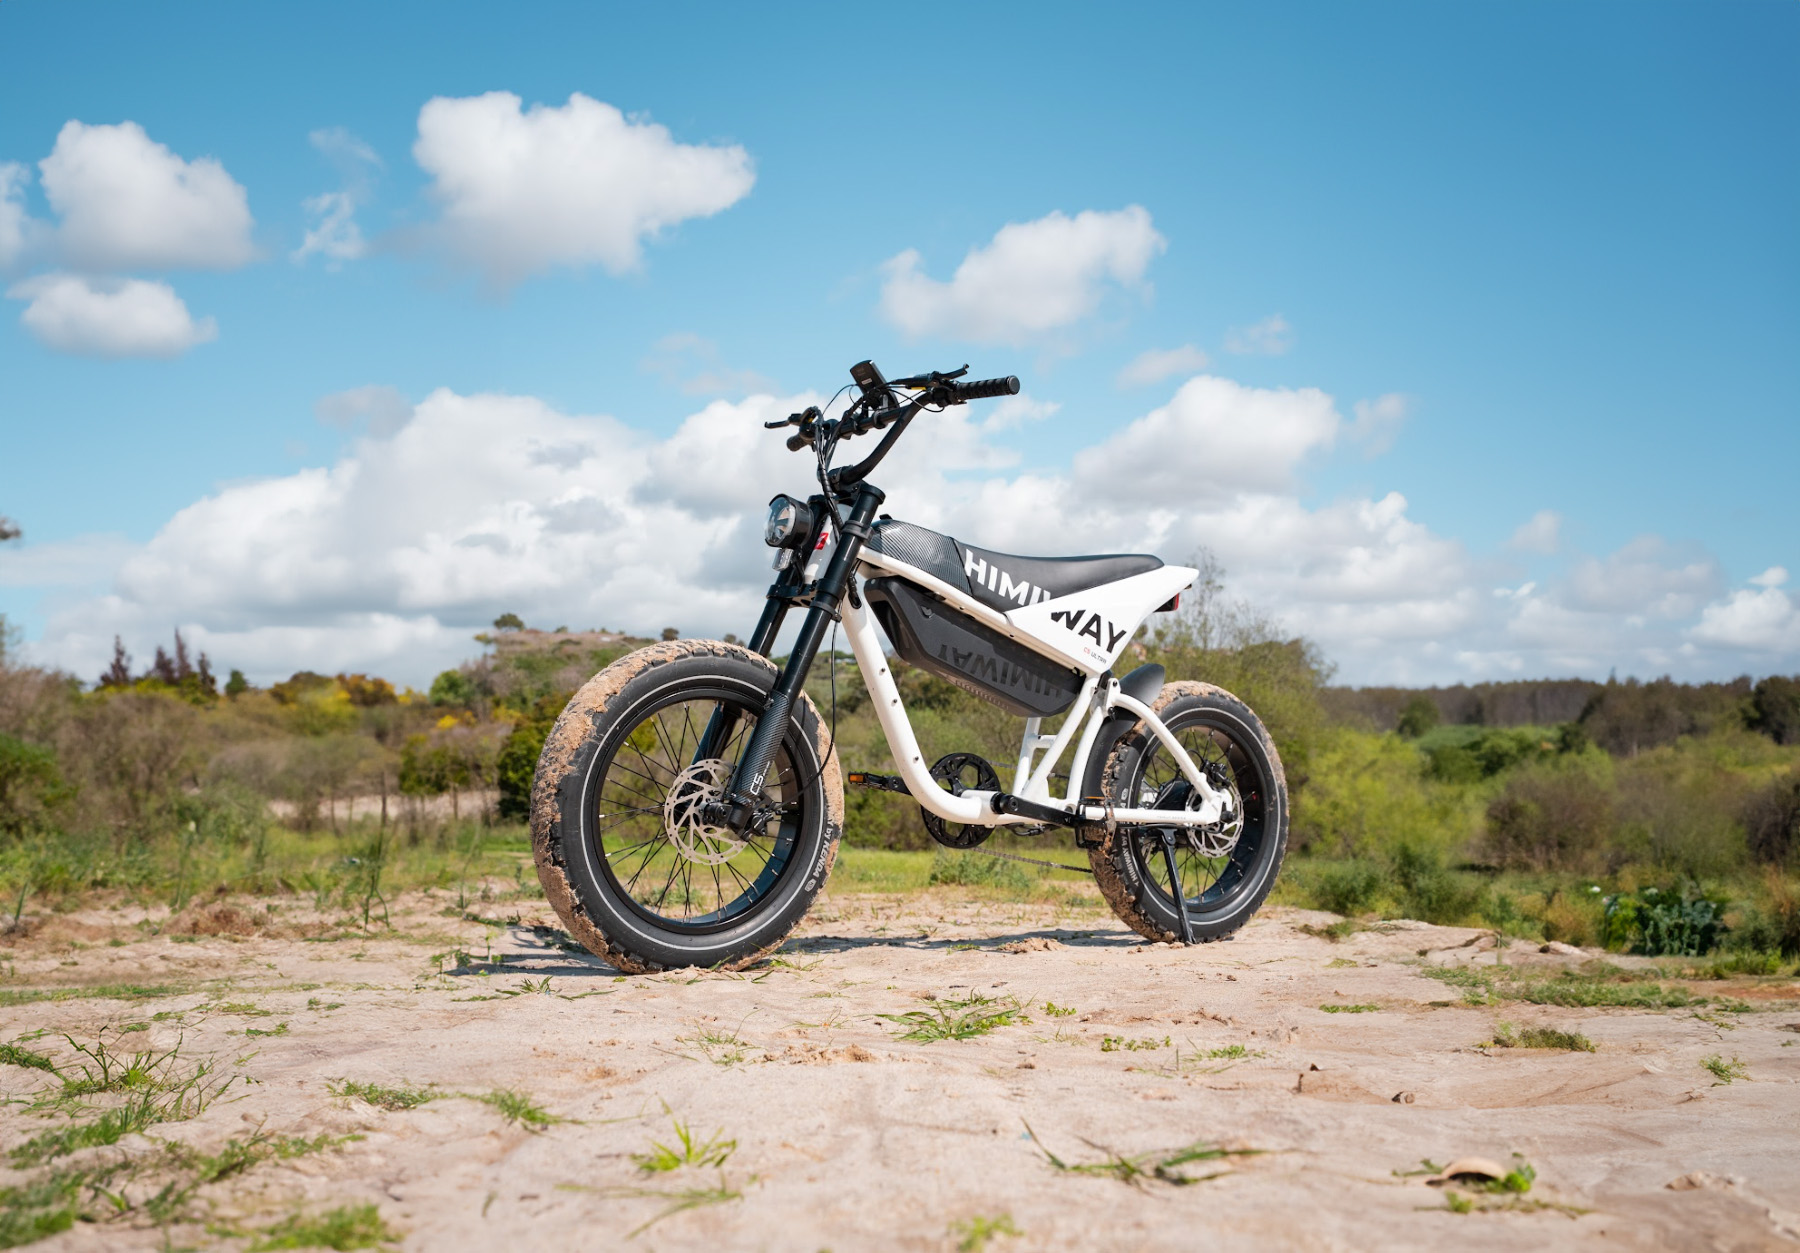 The HIMIWAY C5 electric motorbike takes eBikes to a whole new level